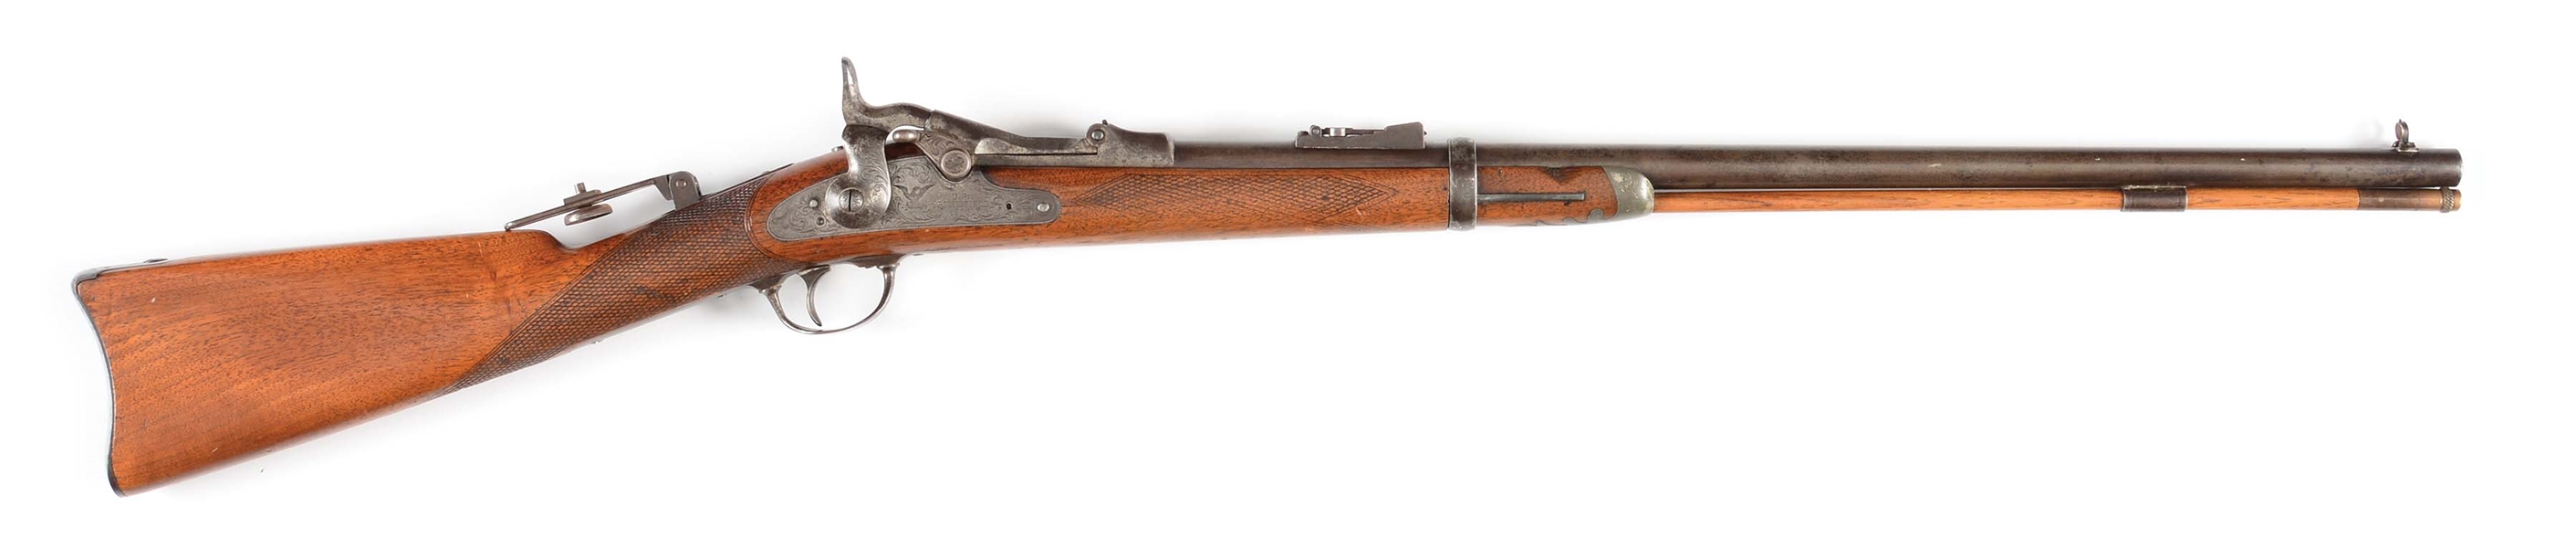 (A) SPRINGFIELD OFFICERS MODEL 1875 .45-70 TRAPDOOR RIFLE.